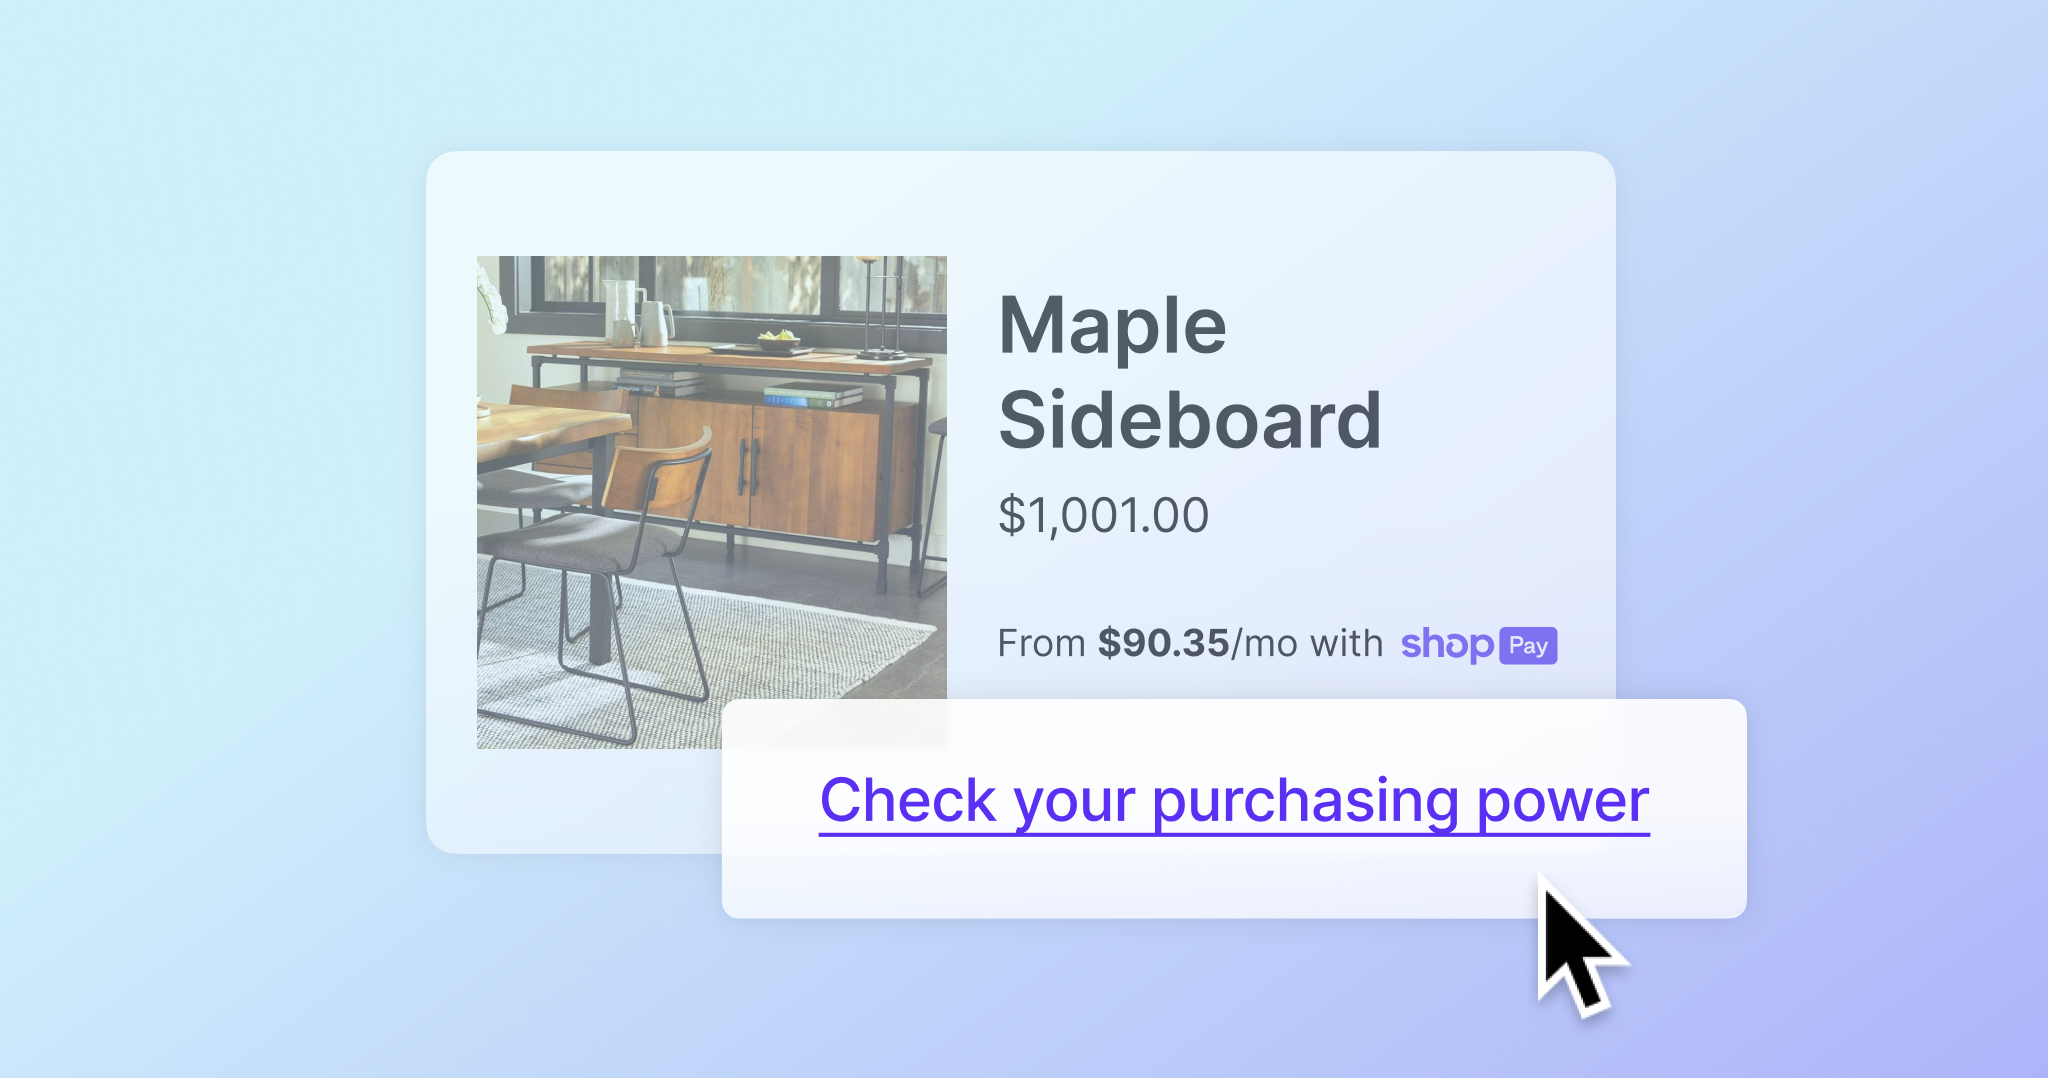 Example of how purchasing power banners display on product detail pages